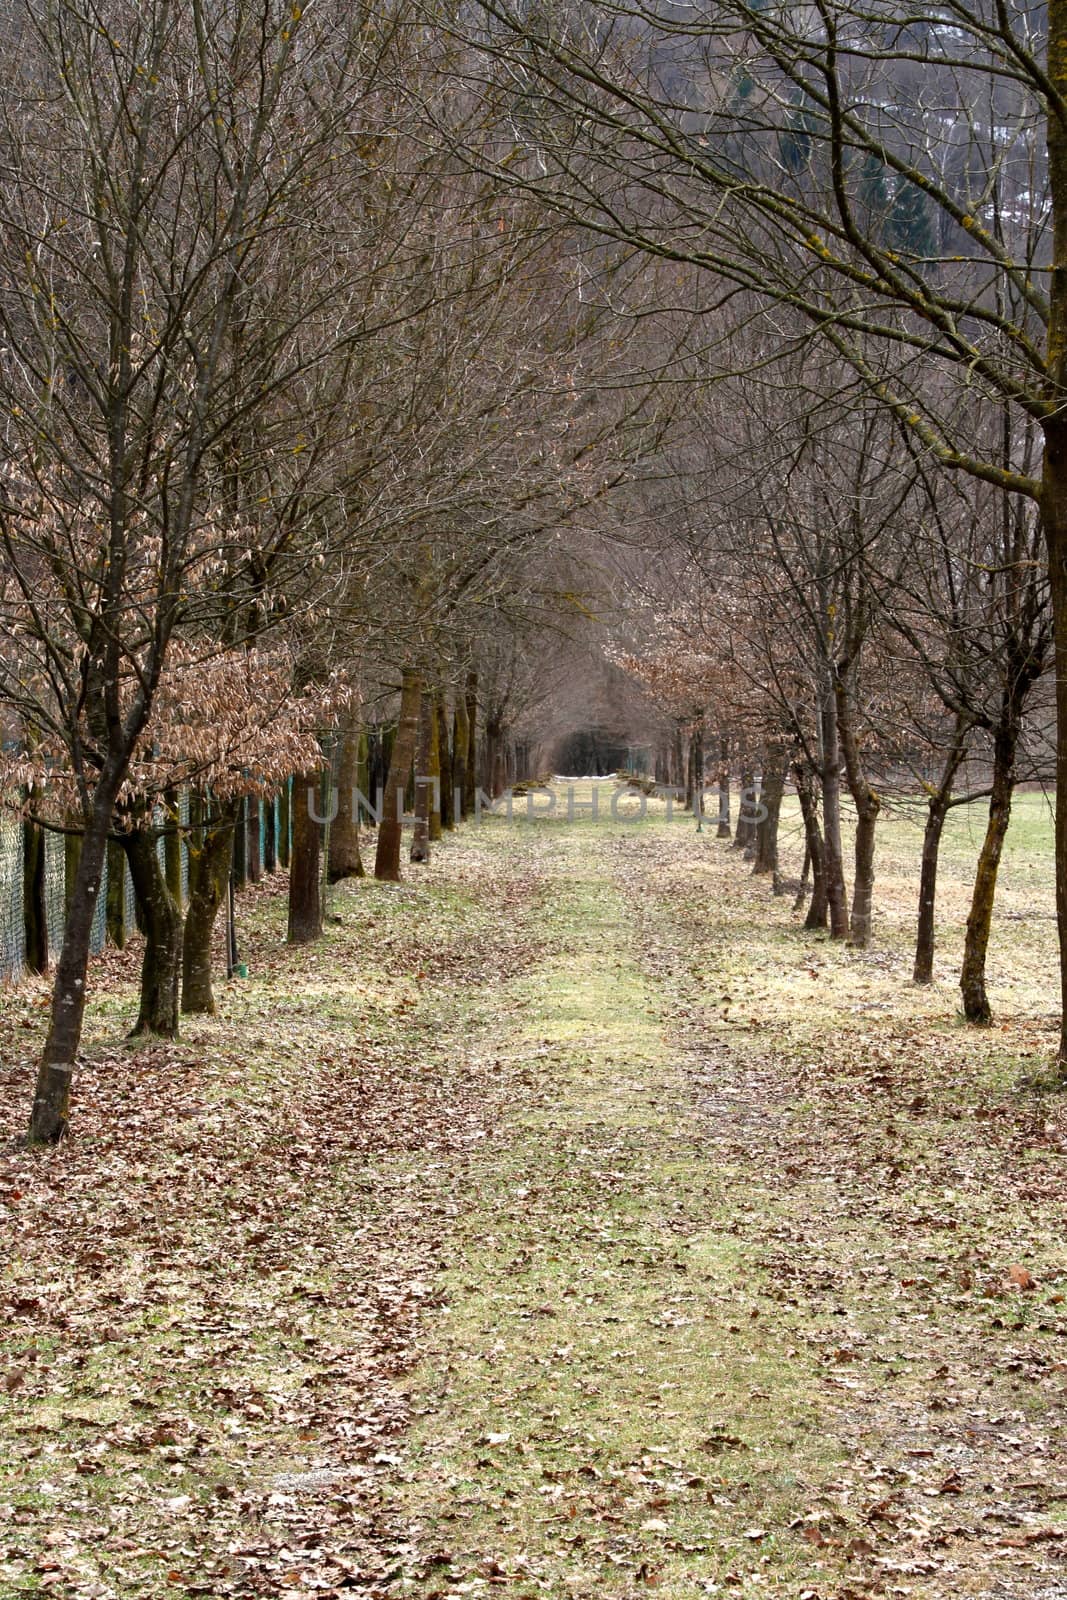 Pathway through the autumn park with fallen leaves